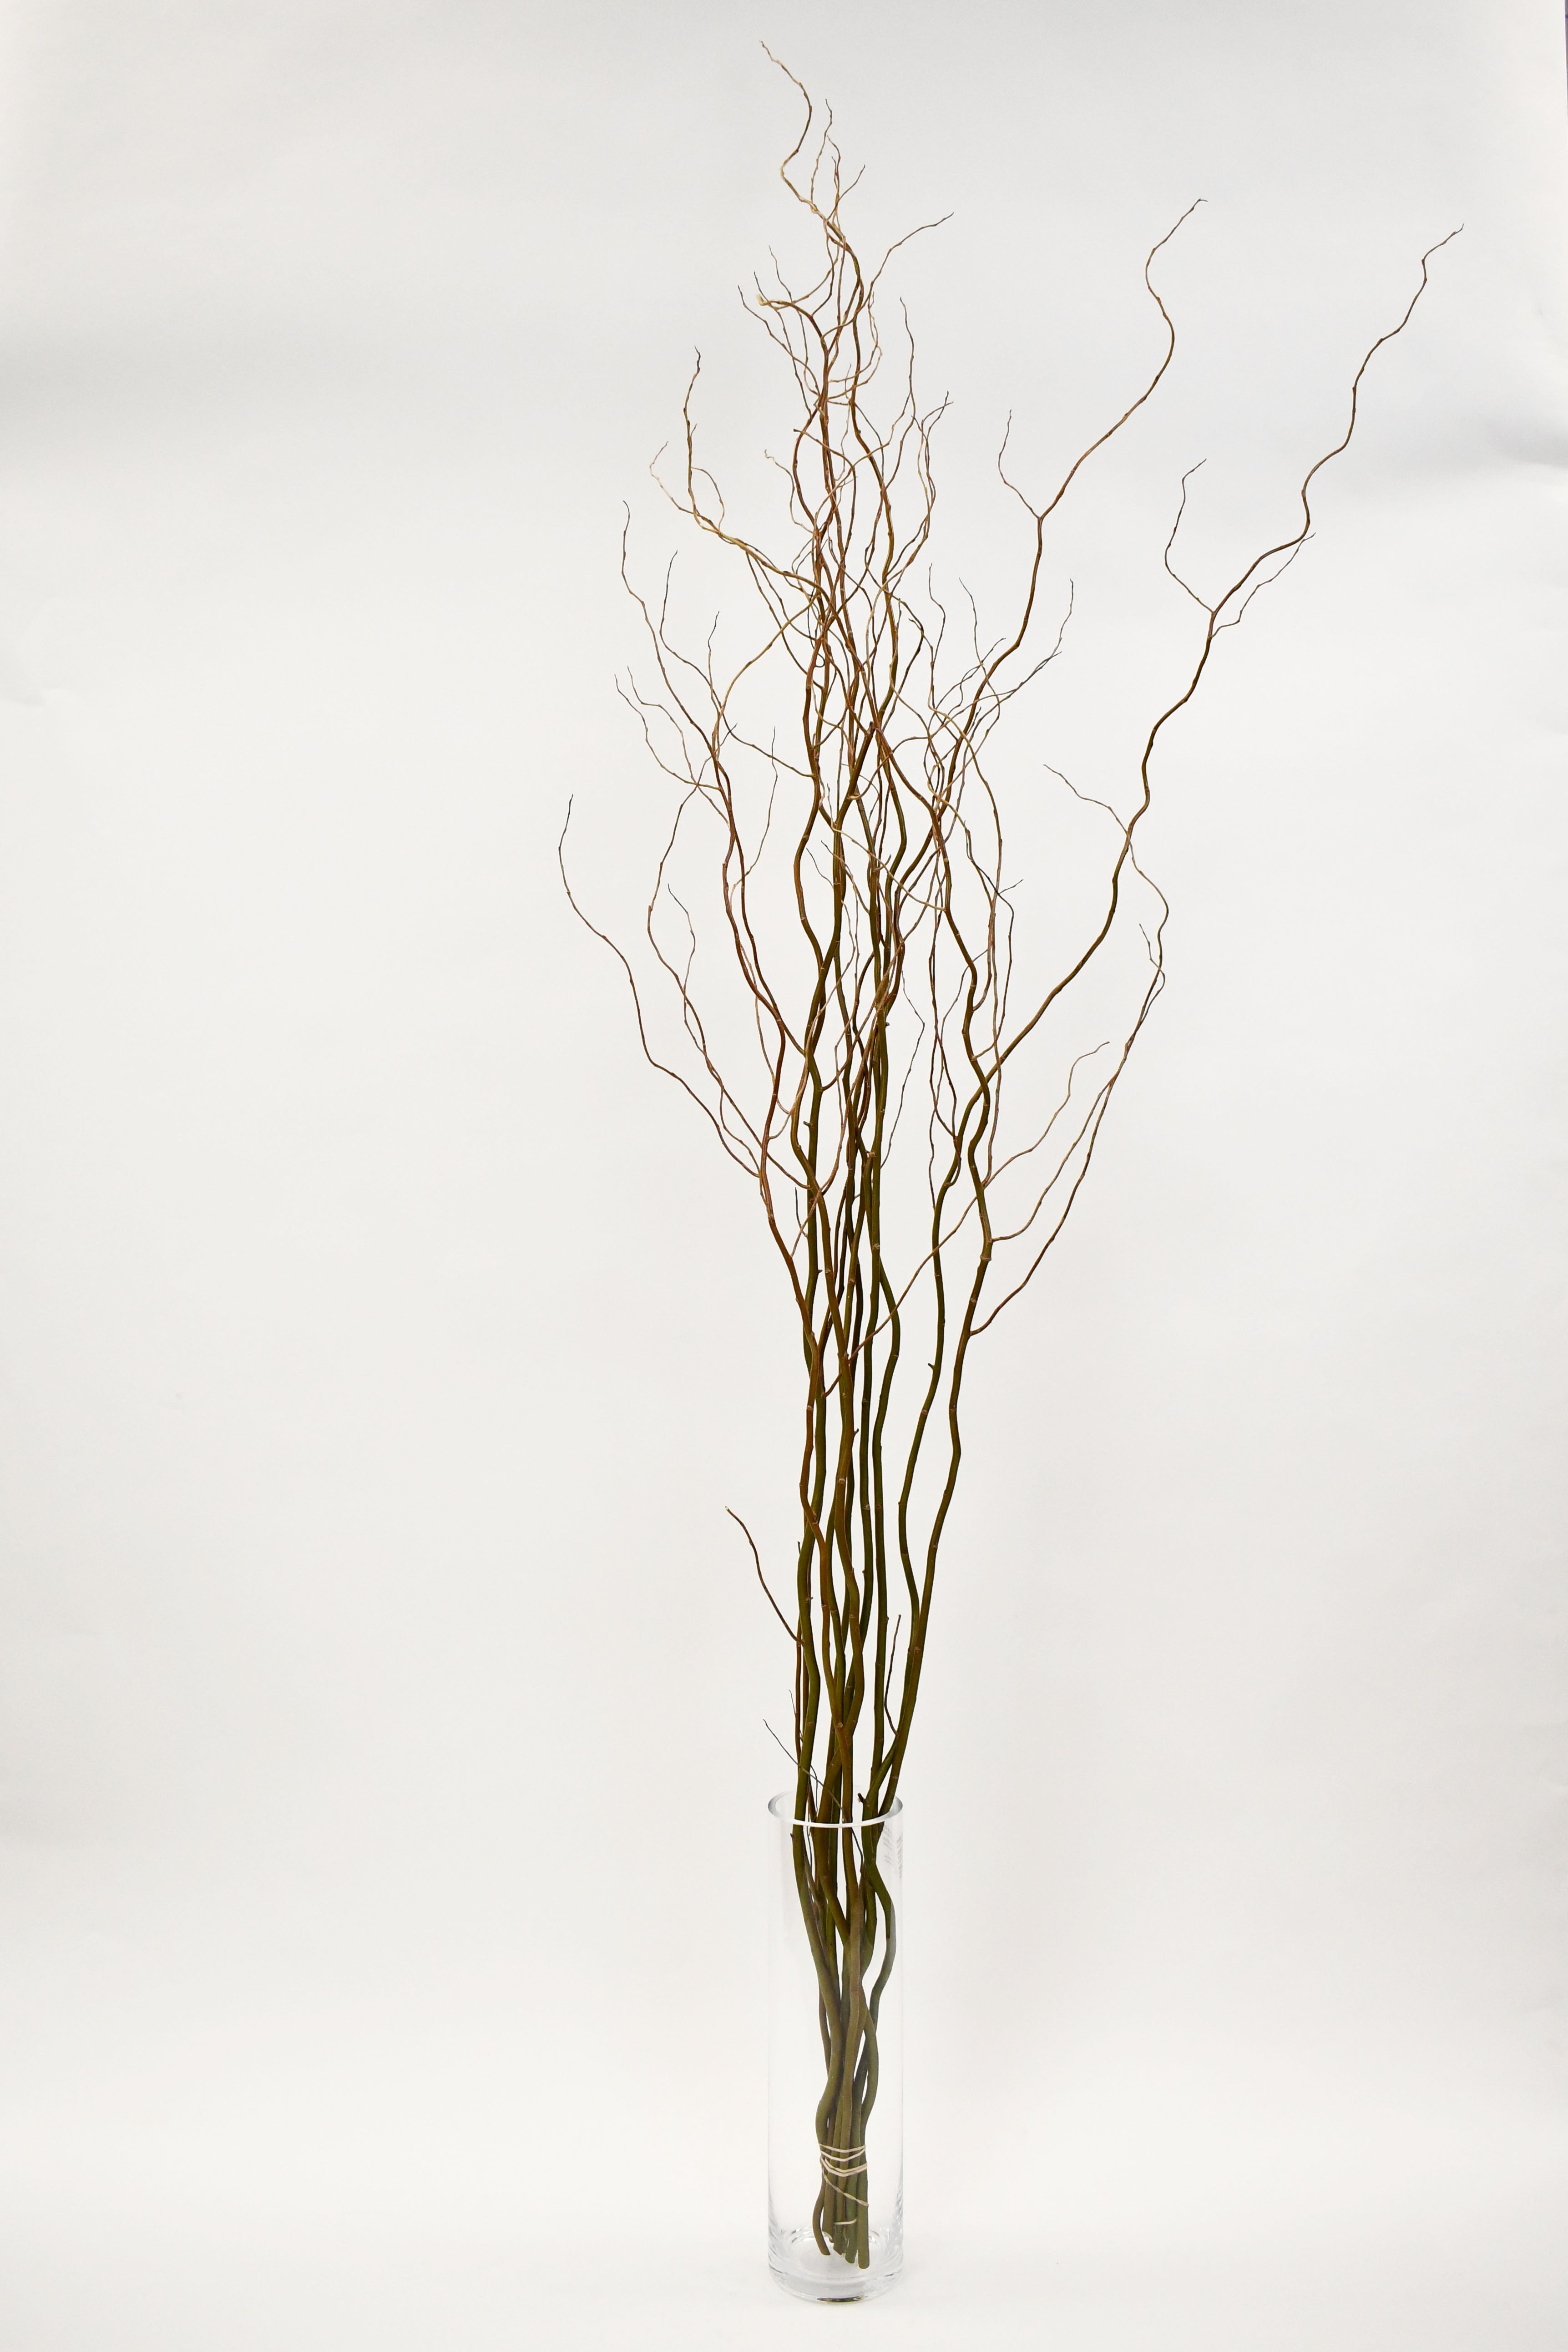 Fresh cut Curly Willow Branches 5 feet tall (4) branch set – Willows & More